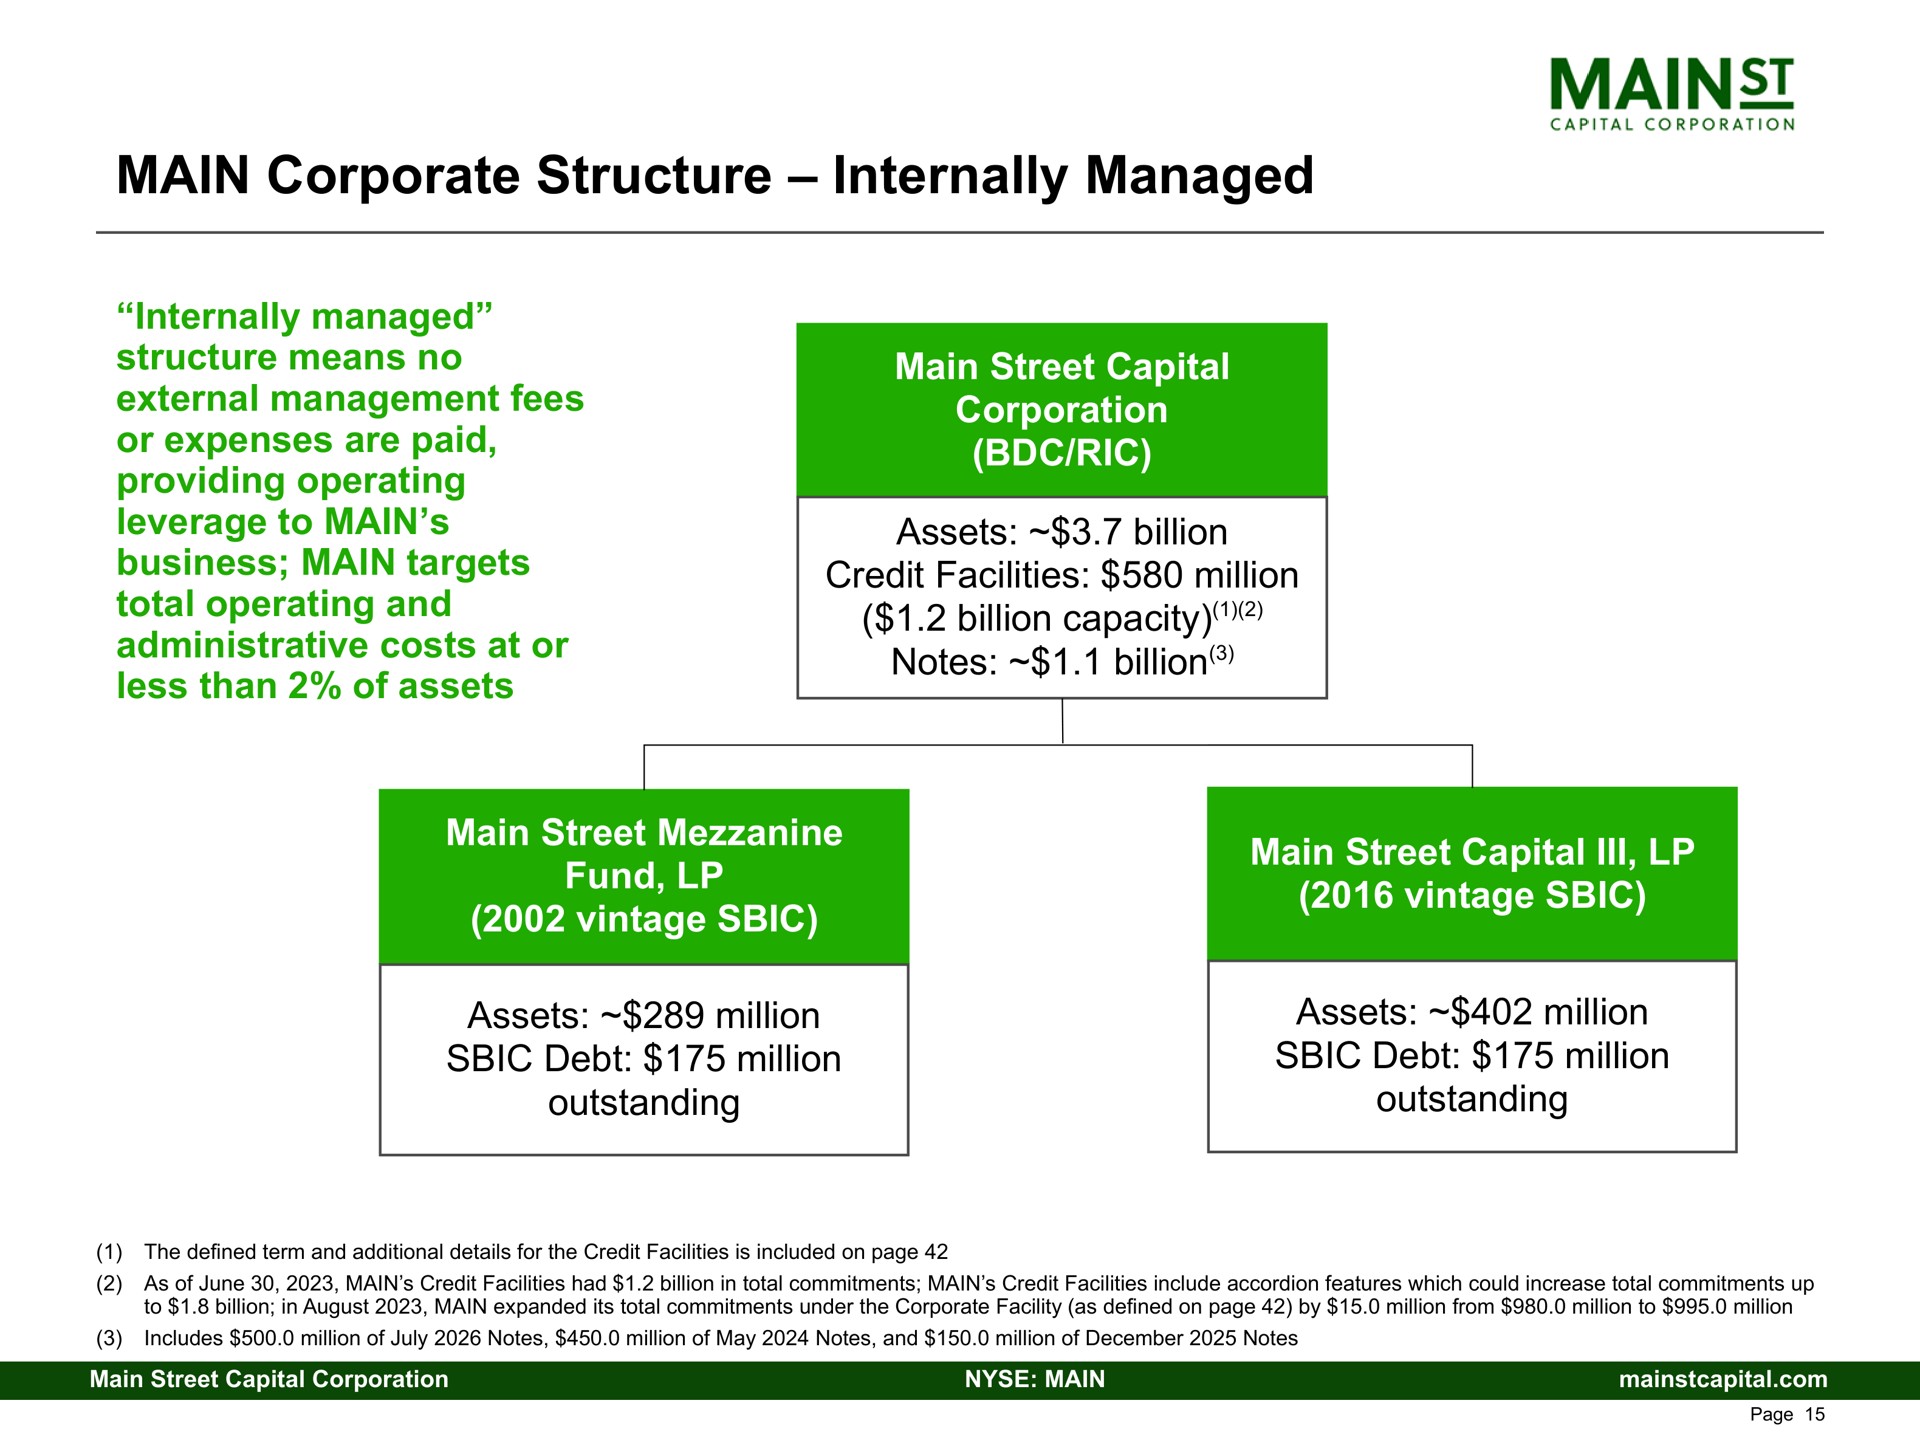 main corporate structure internally managed business targets credit facilities million | Main Street Capital